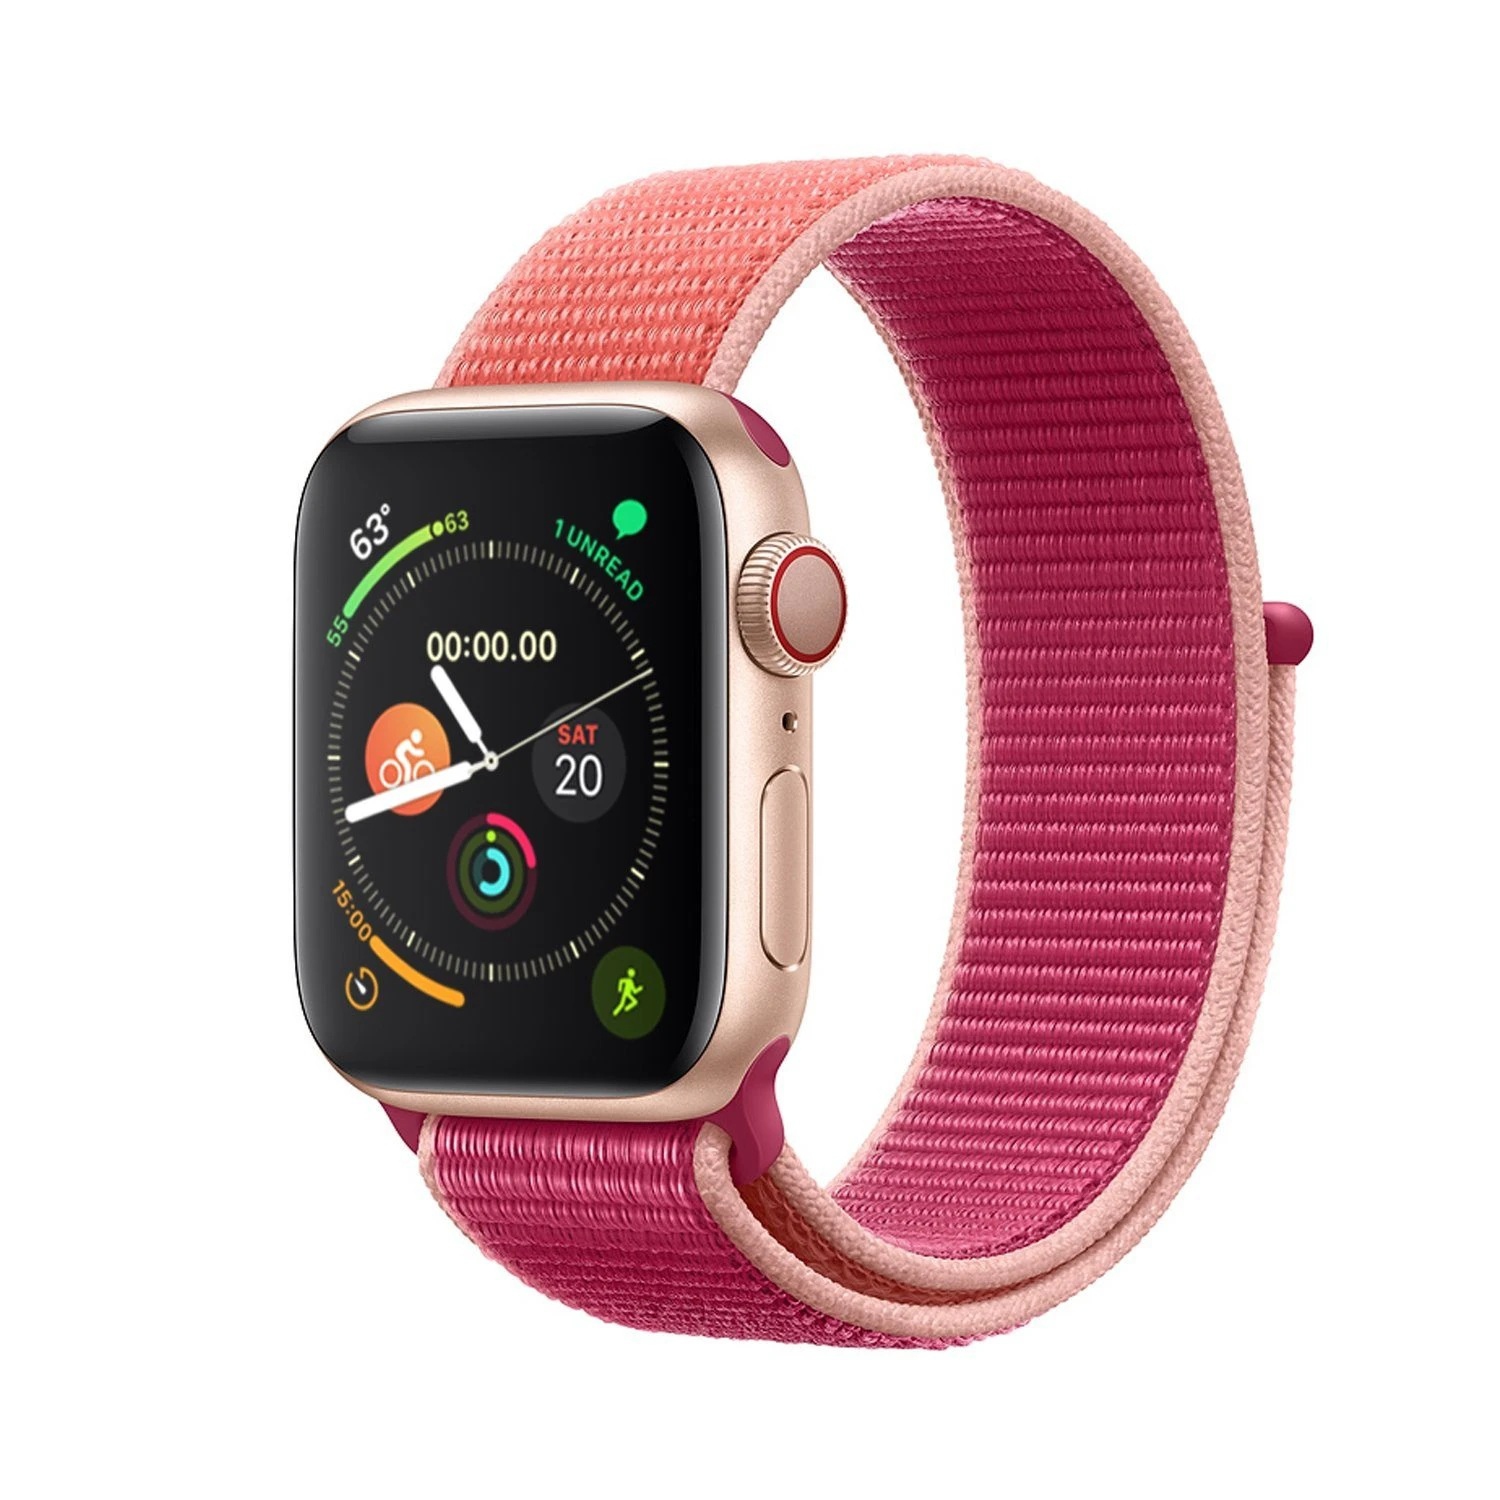 Woven Nylon Sport Loop Replacement Band Strap for Apple Watch iWatch Series 1 to 7 SE, 38mm 40mm 41mm, Hot Pink